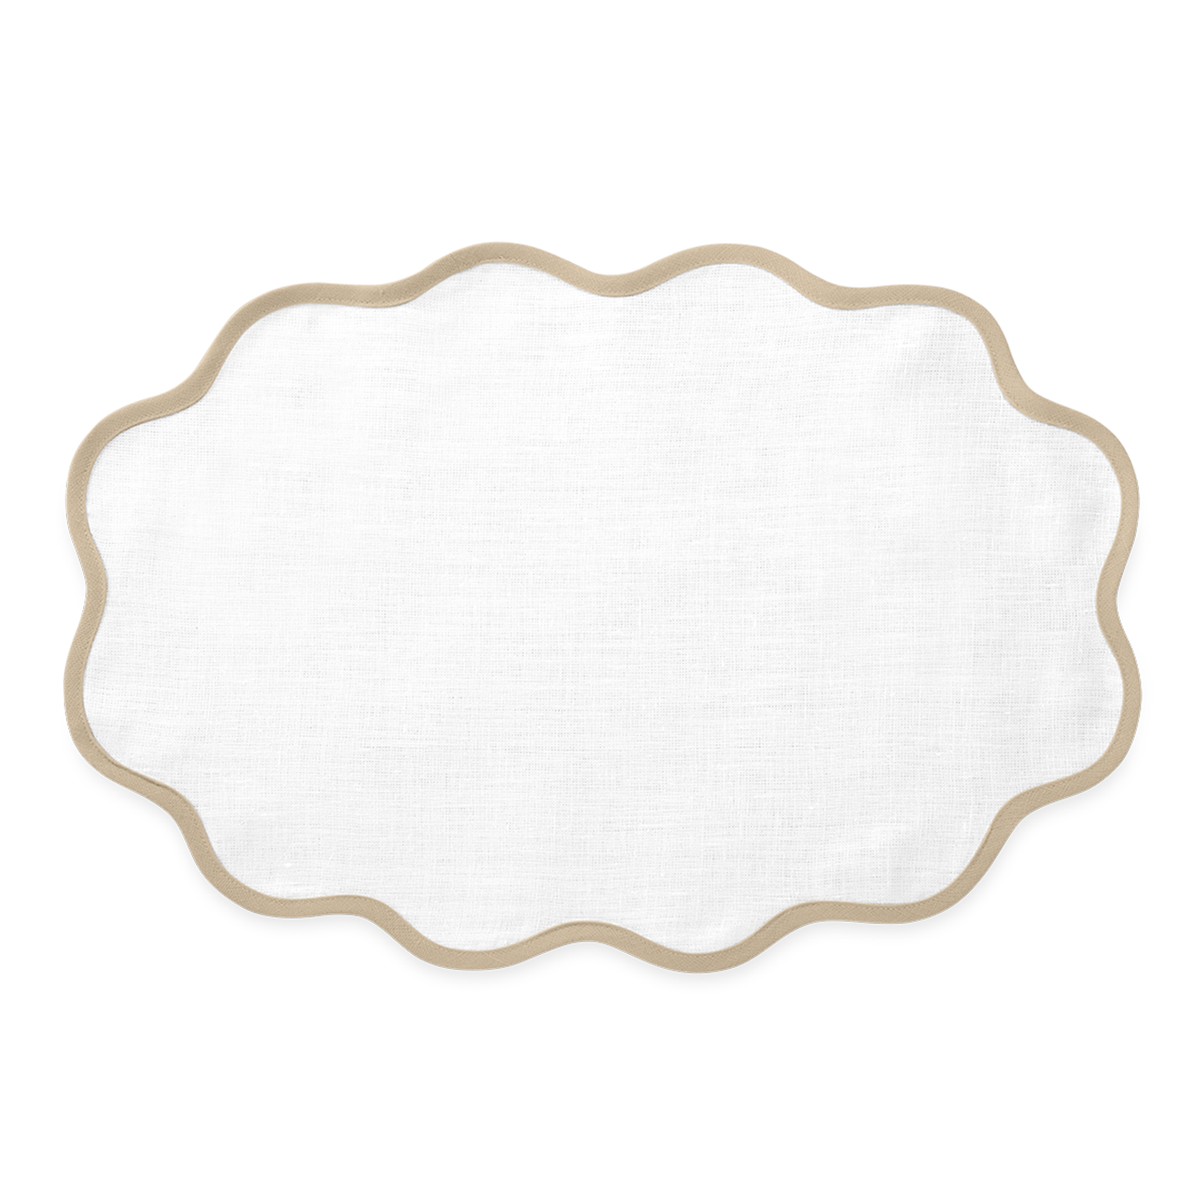 Oval Placemat of Matouk Scallop Edge Table Linens in Color Oat